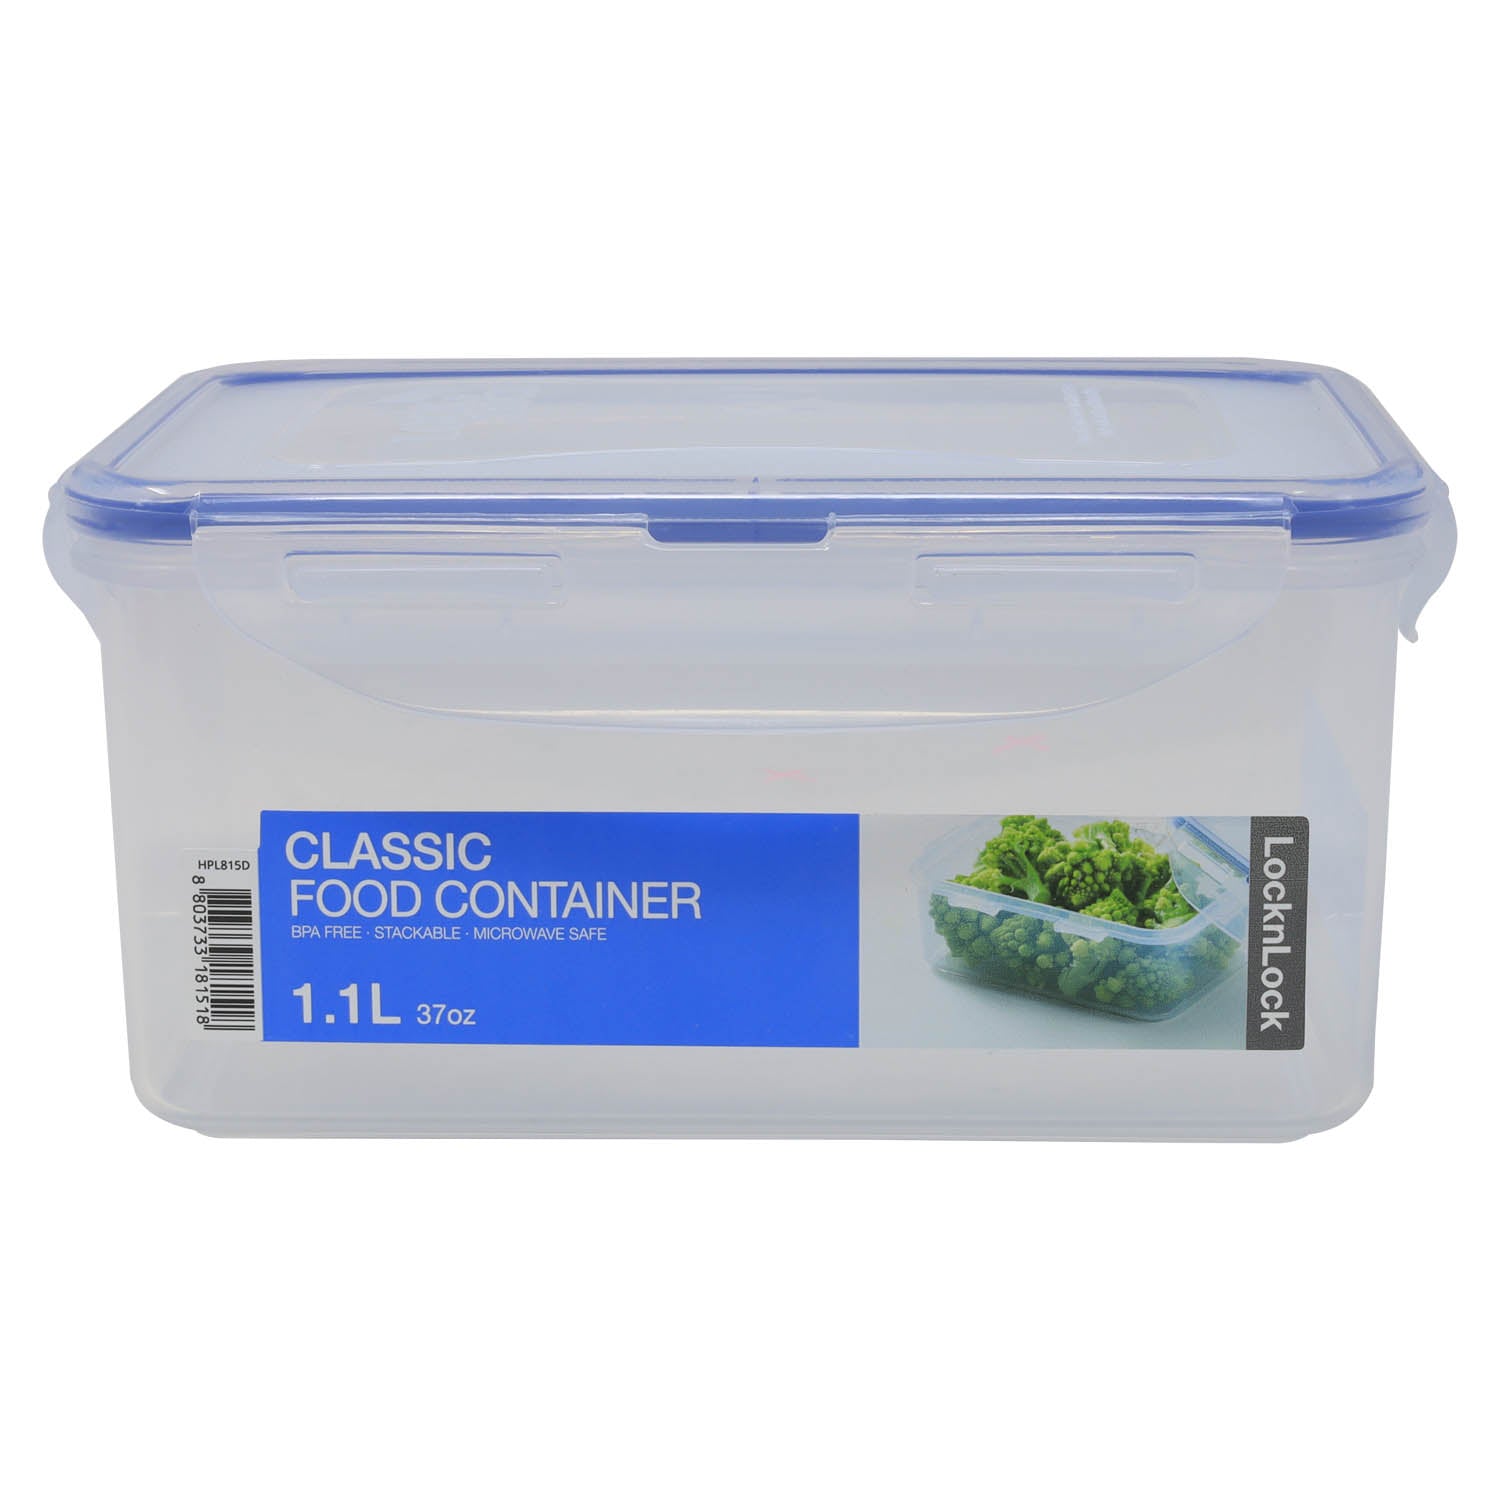 Lock & Lock 3.9L Classic Short Rectangular Food Container - Clear/Blue Lock  N Lock Special Design first choice